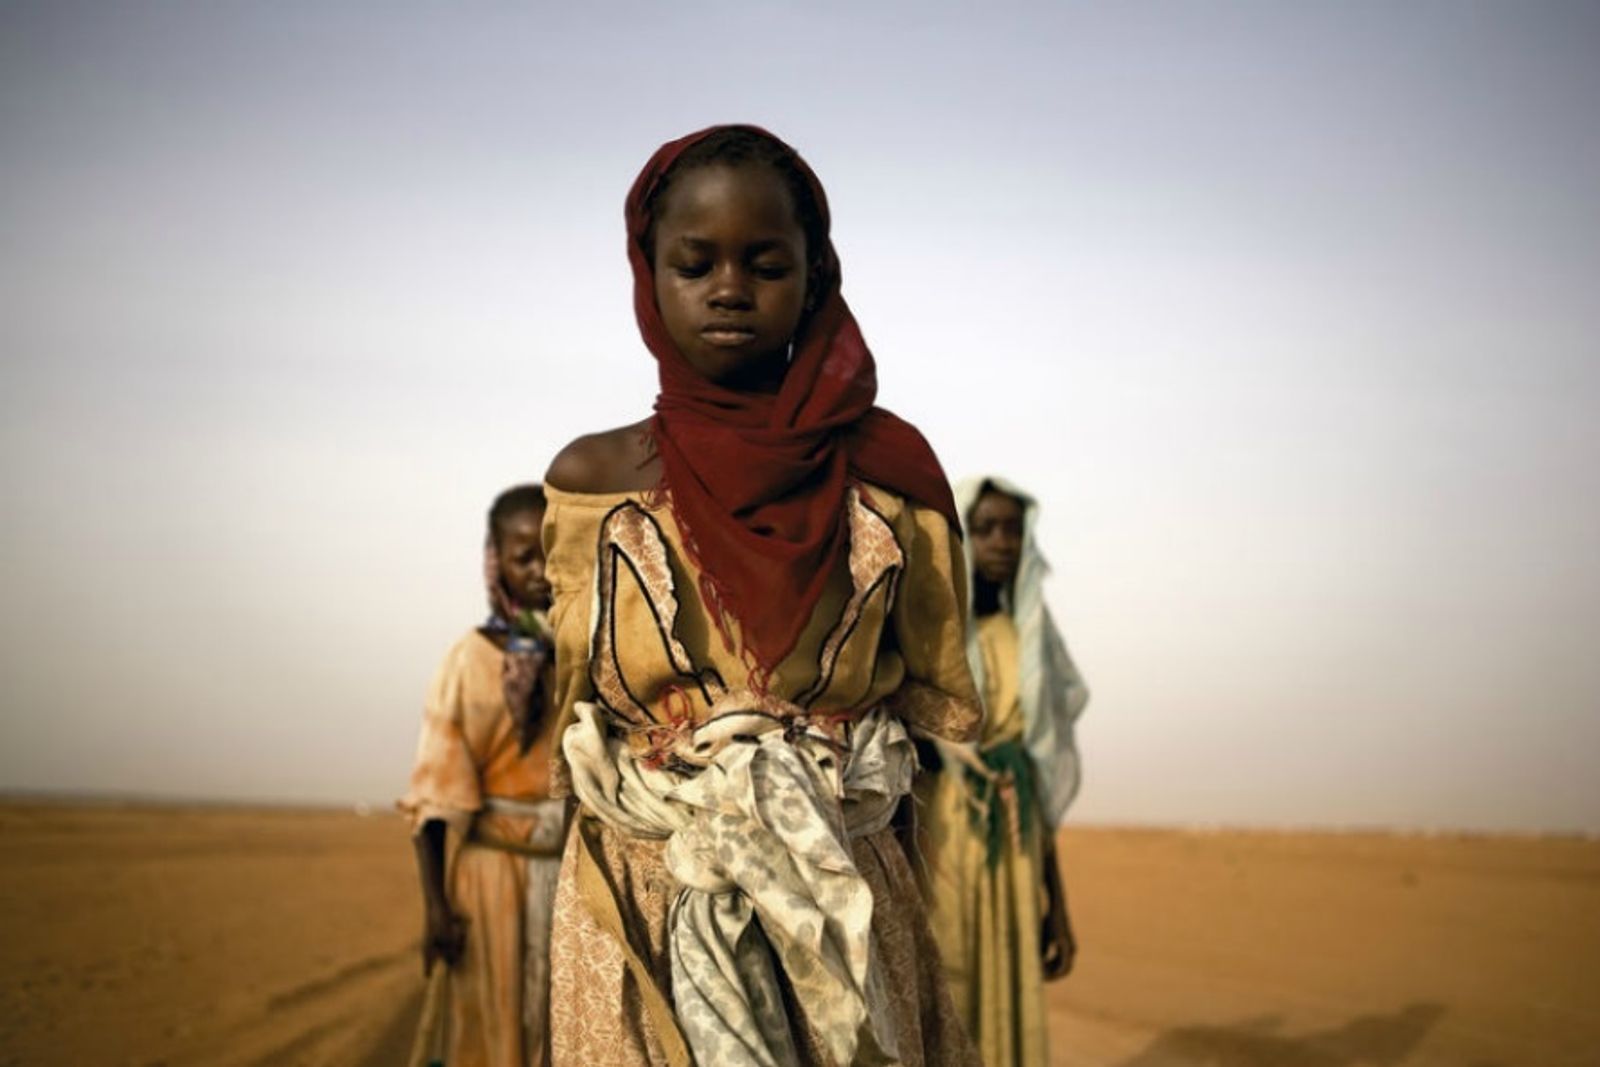 Image from the series Children of Darfur by © Ron Haviv